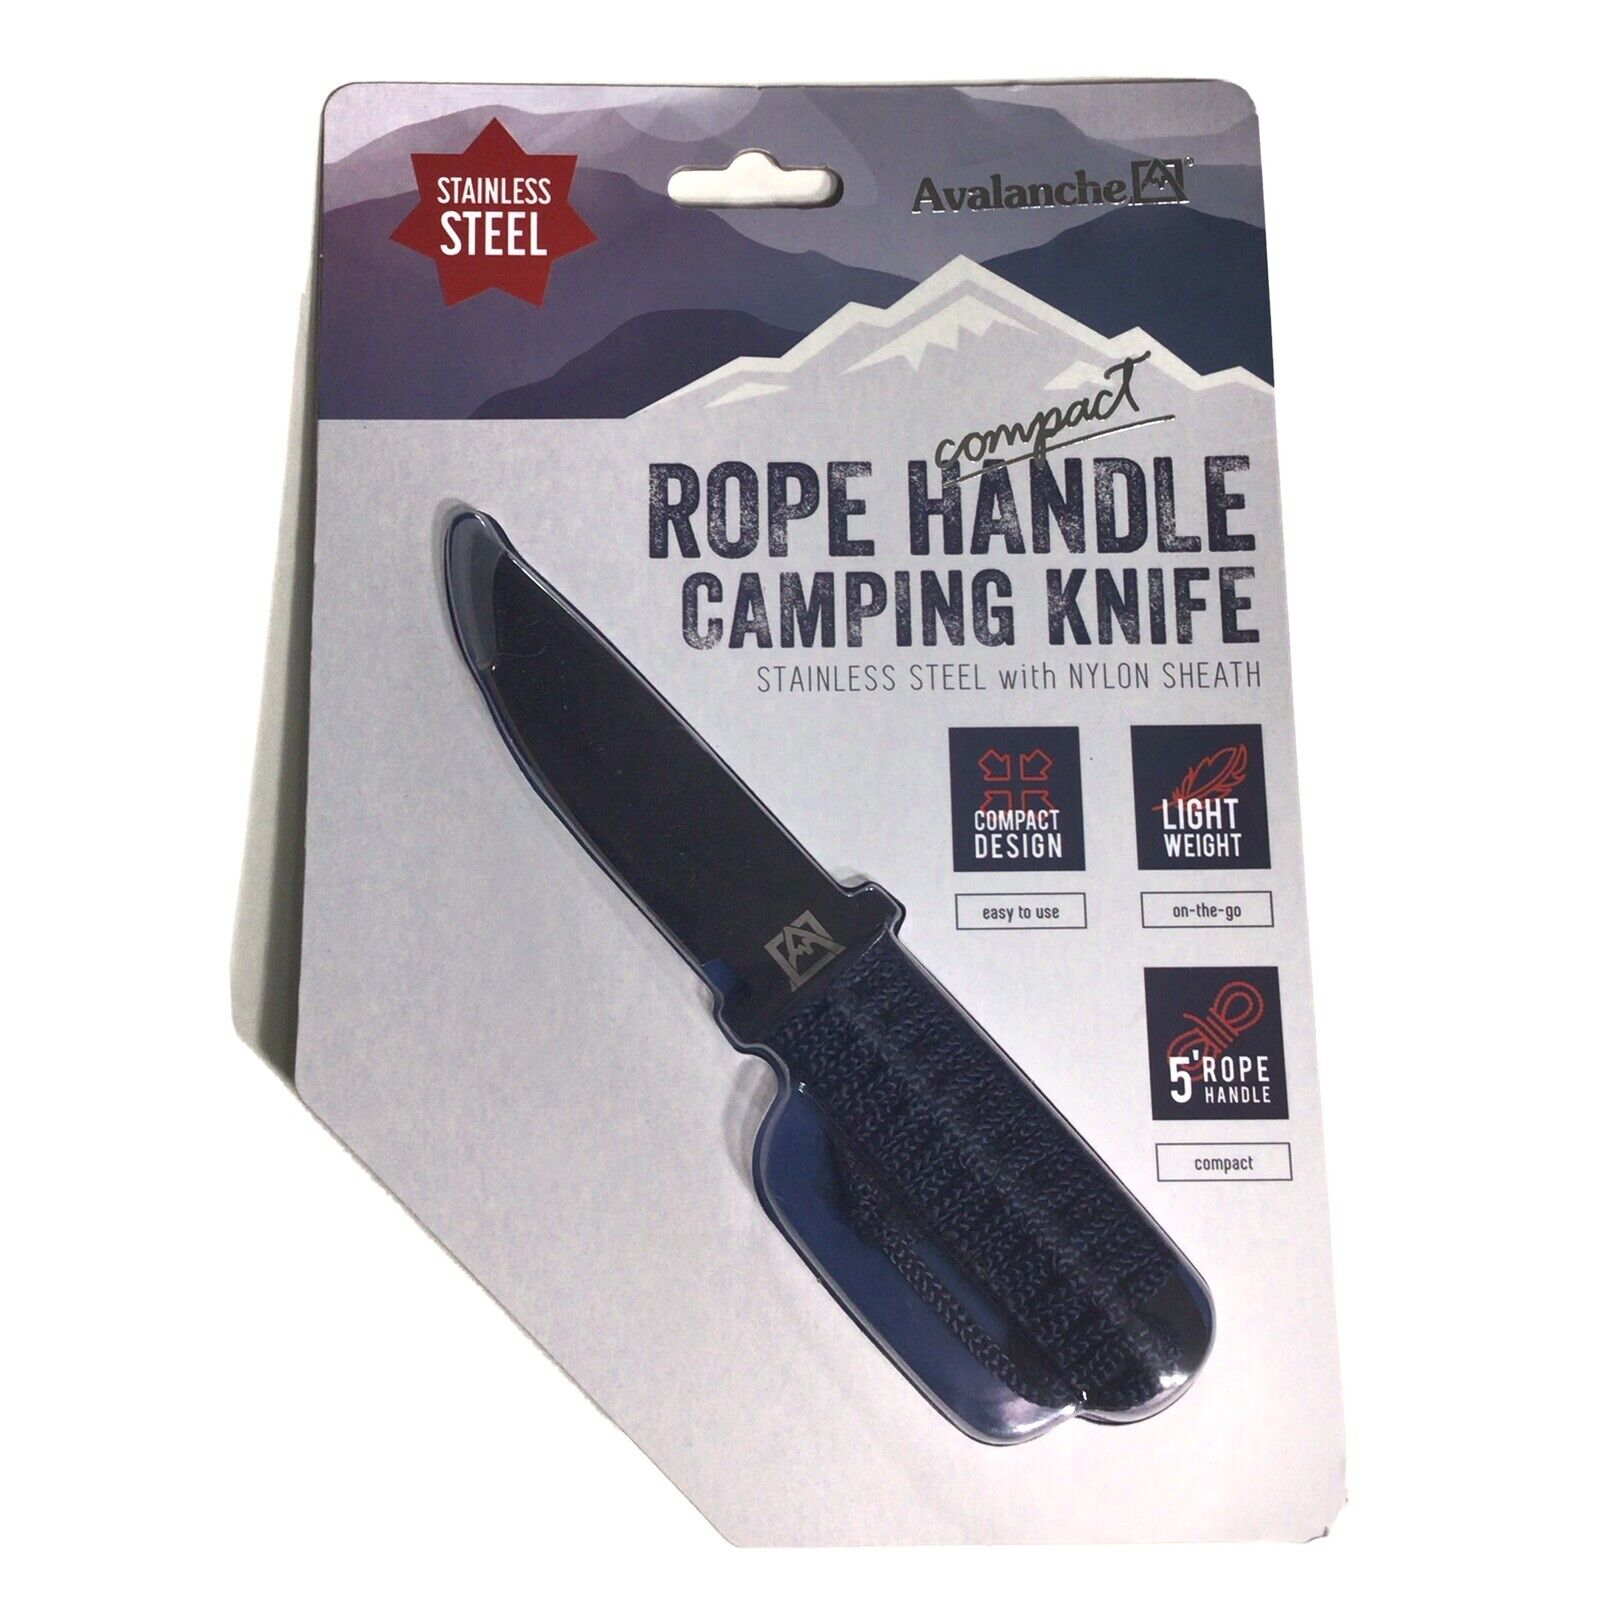 Avalanche Camping Knife Compact Stainless Steel Lightweight 5” Rope 